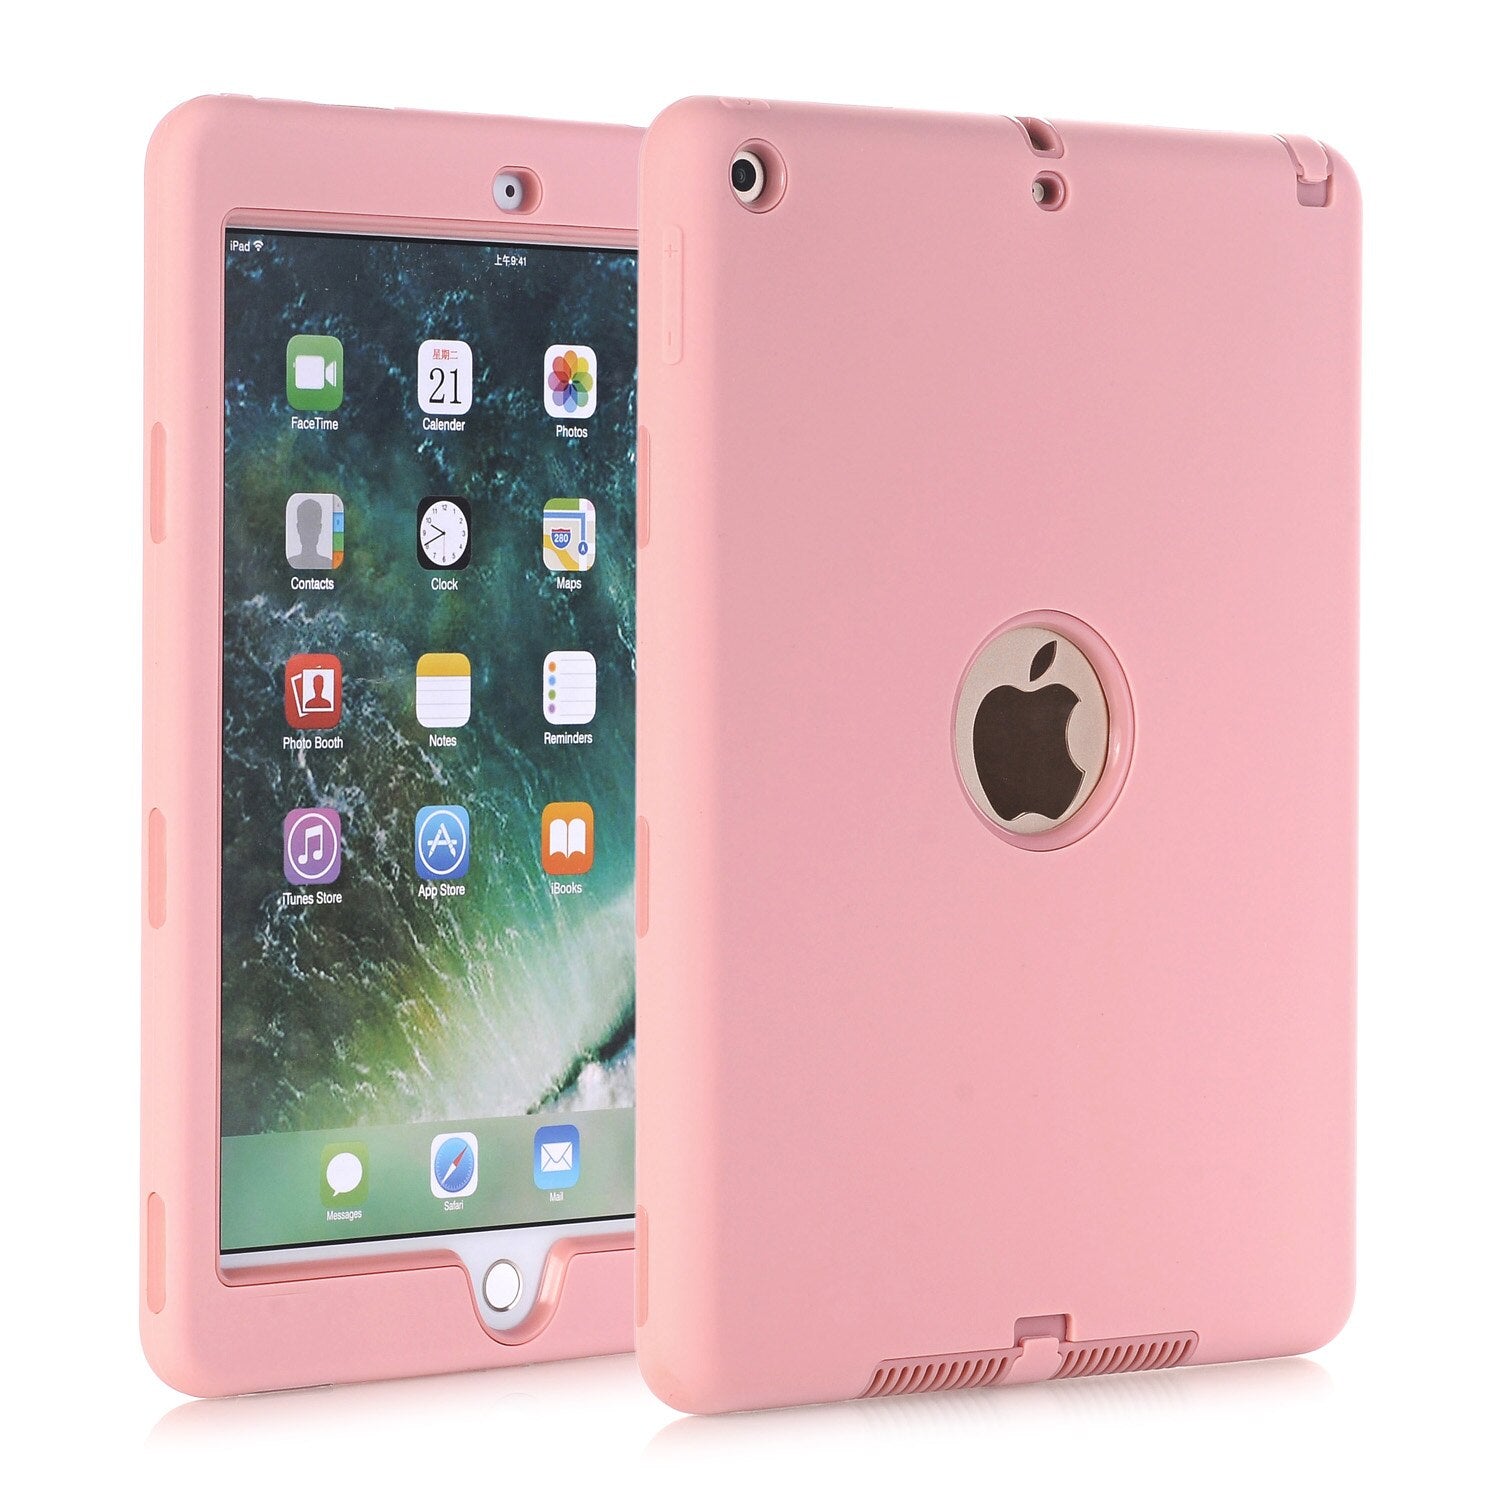 Cases For New iPad 9.7" 2017 (A1822/A1823),High-Impact Shockproof 3 Layers Soft Rubber Silicone+Hard PC Protective Cover Shell - 200001091 Rose Gold / United States Find Epic Store